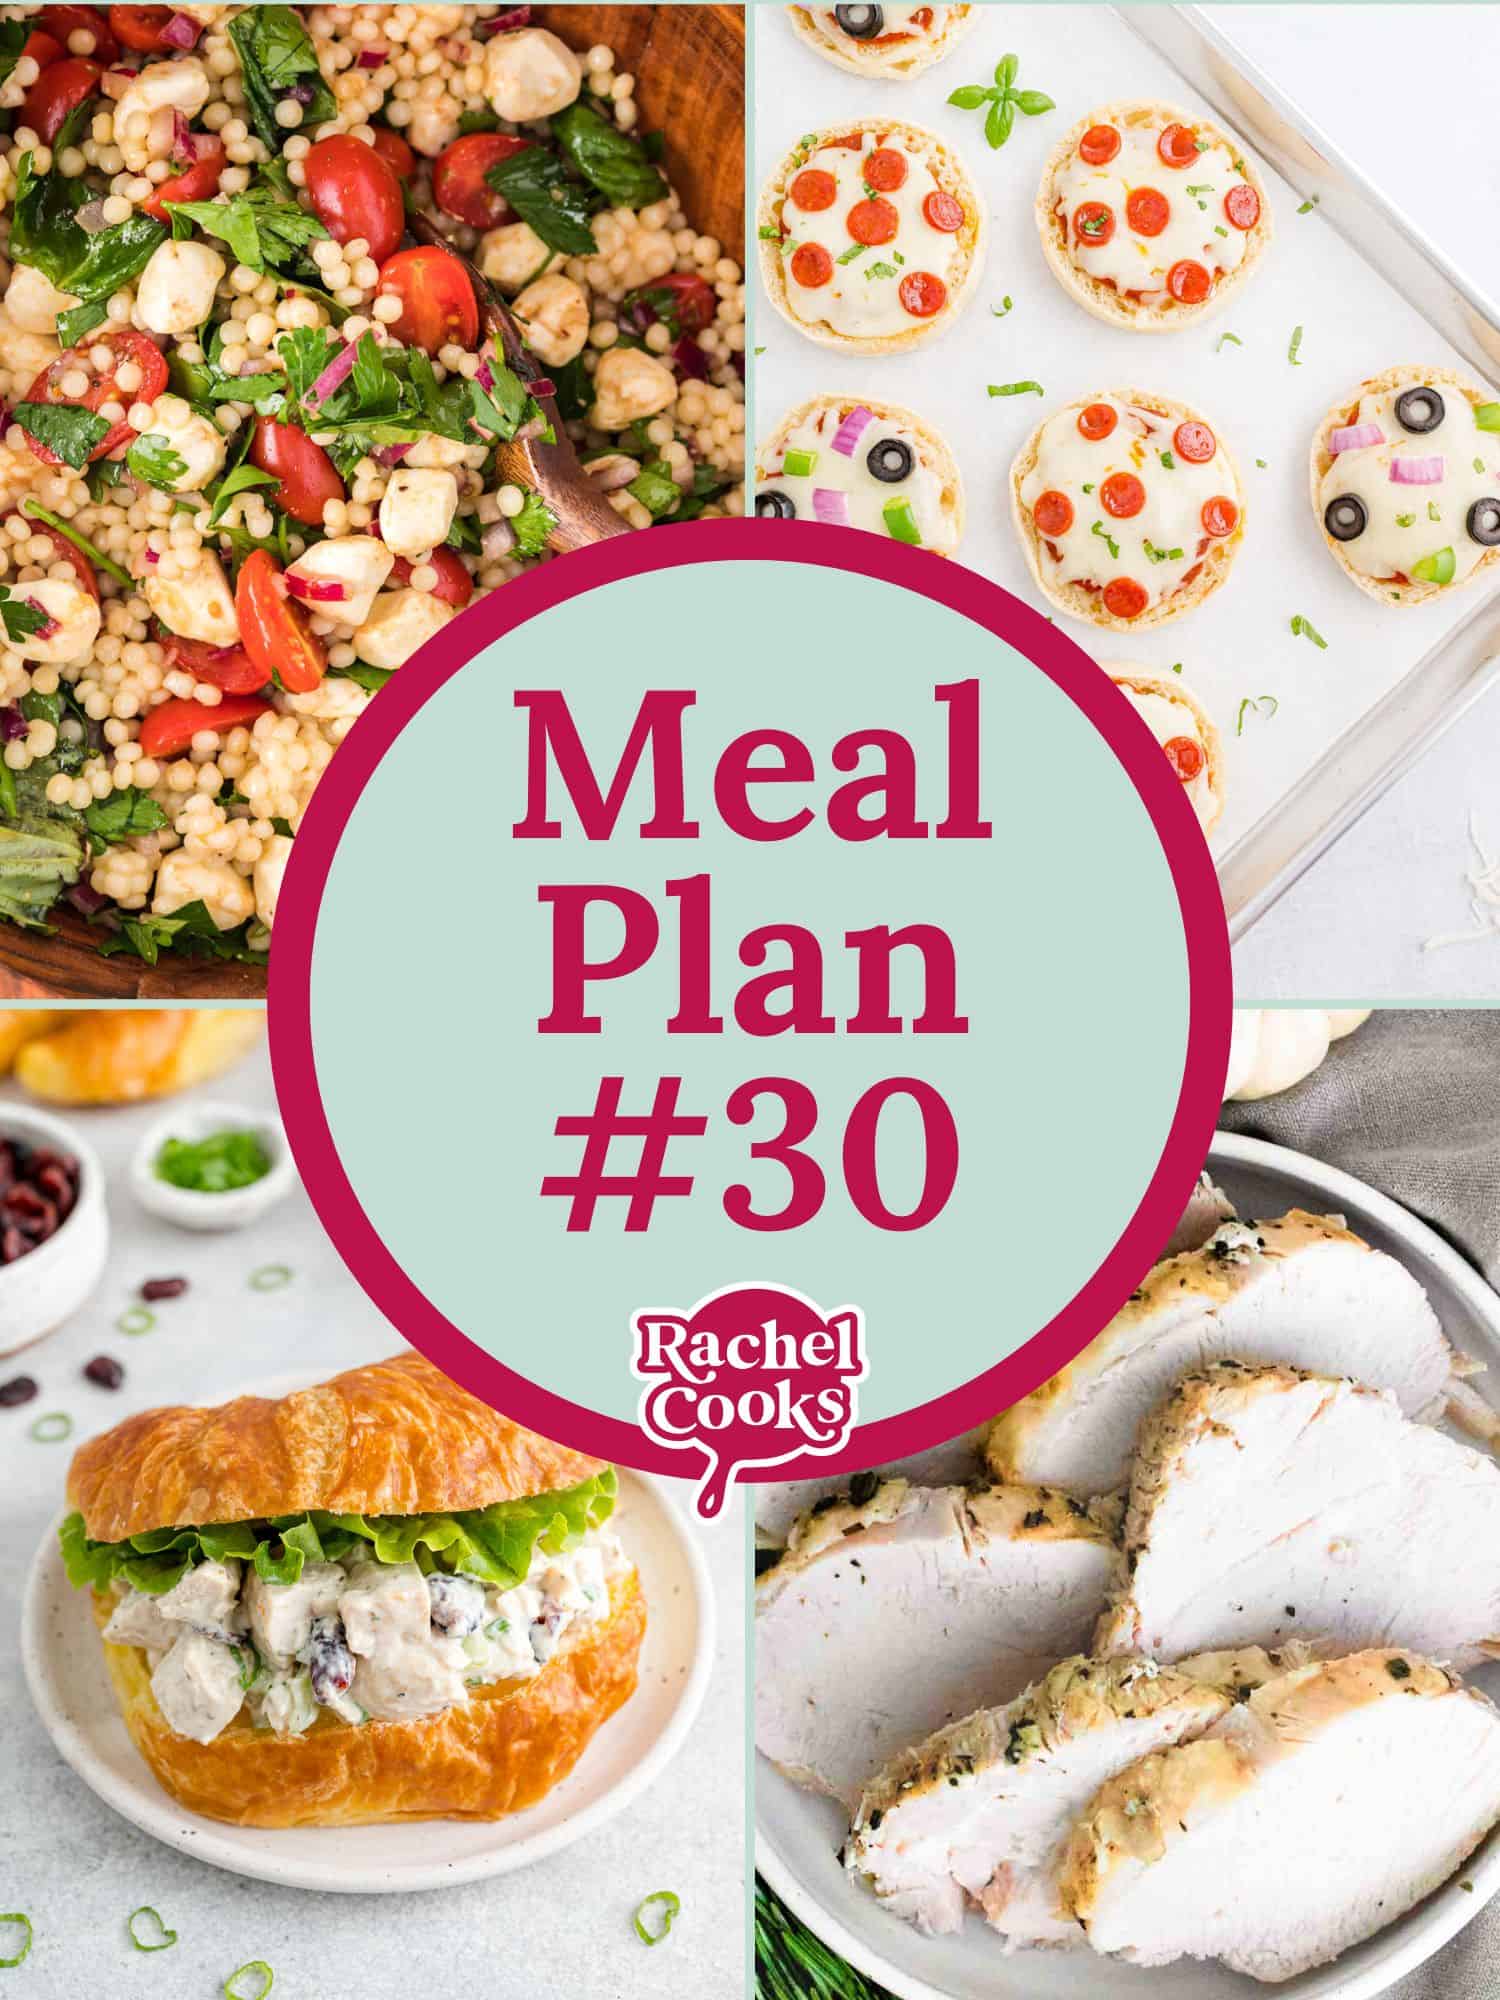 Meal plan 30 graphic with text and photos.